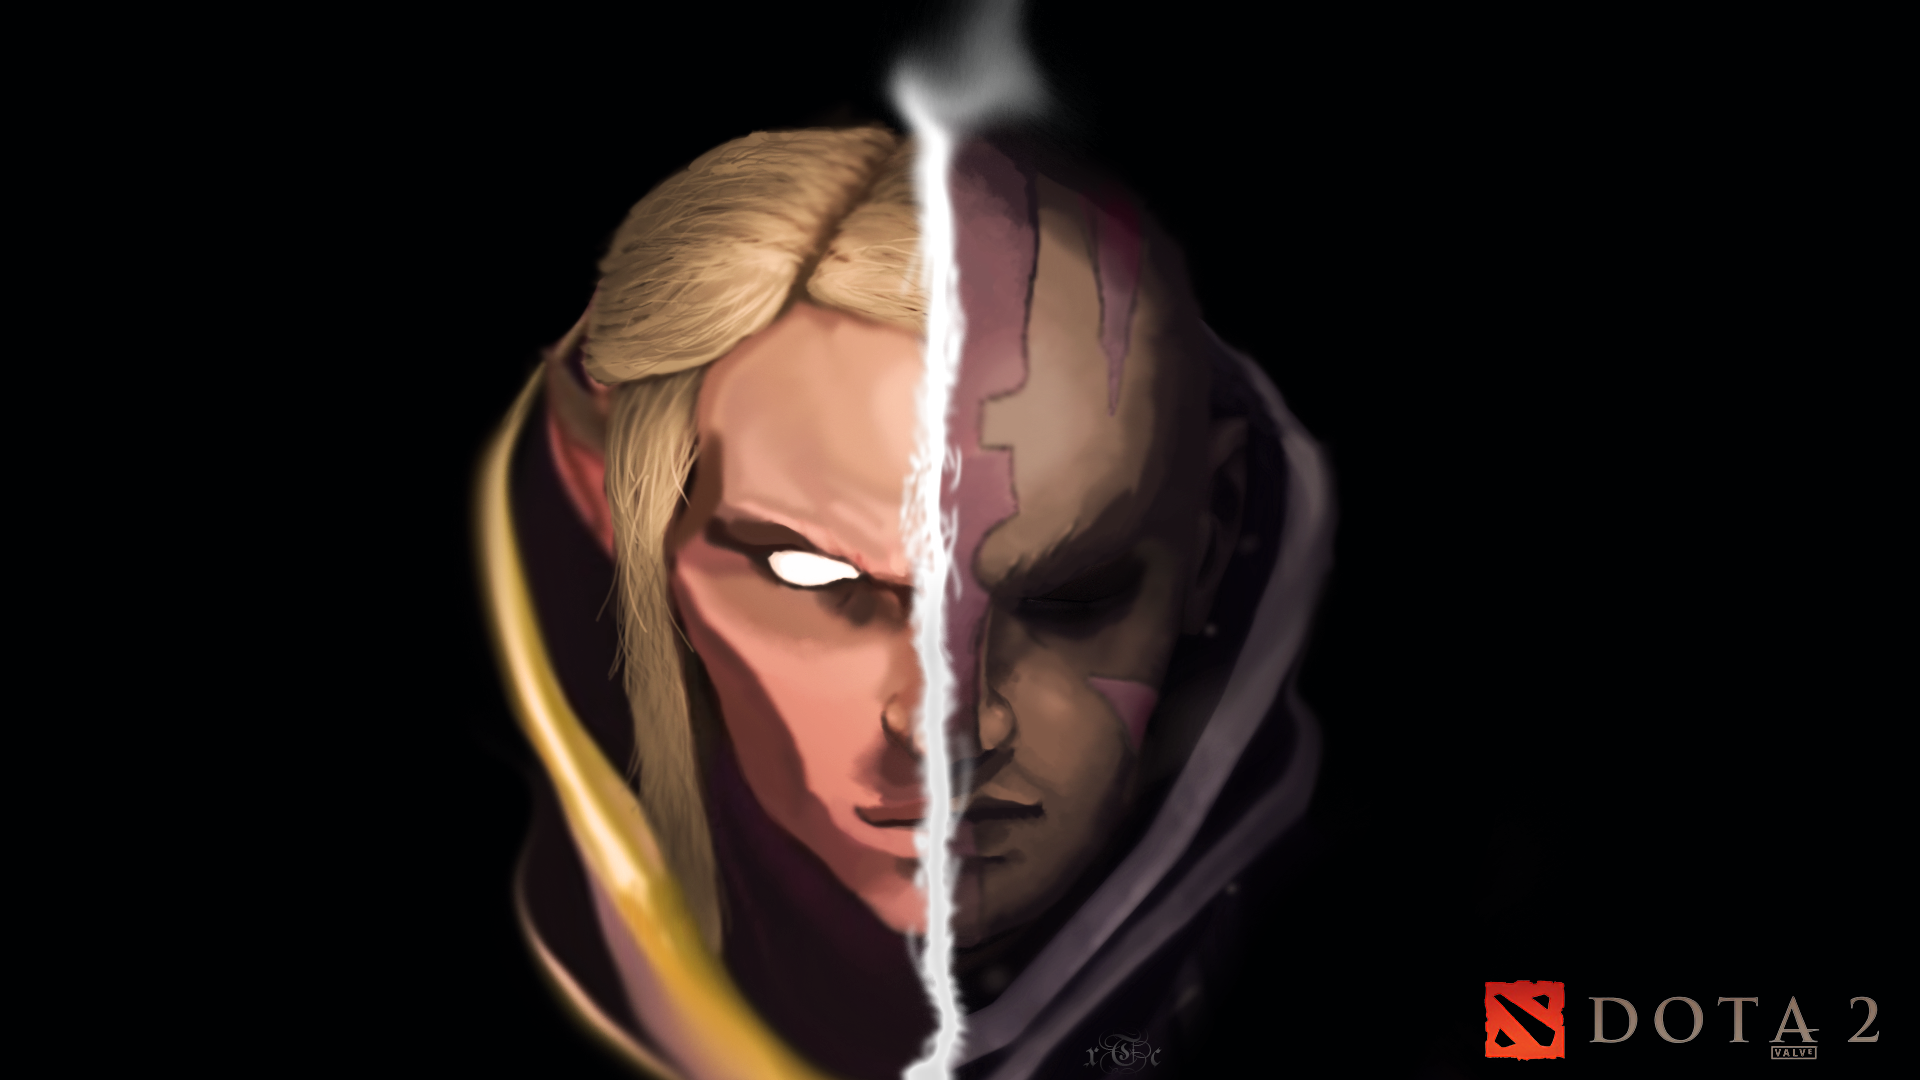 I painted an Invoker/Antimage Wallpaper using only a mouse. : DotA2